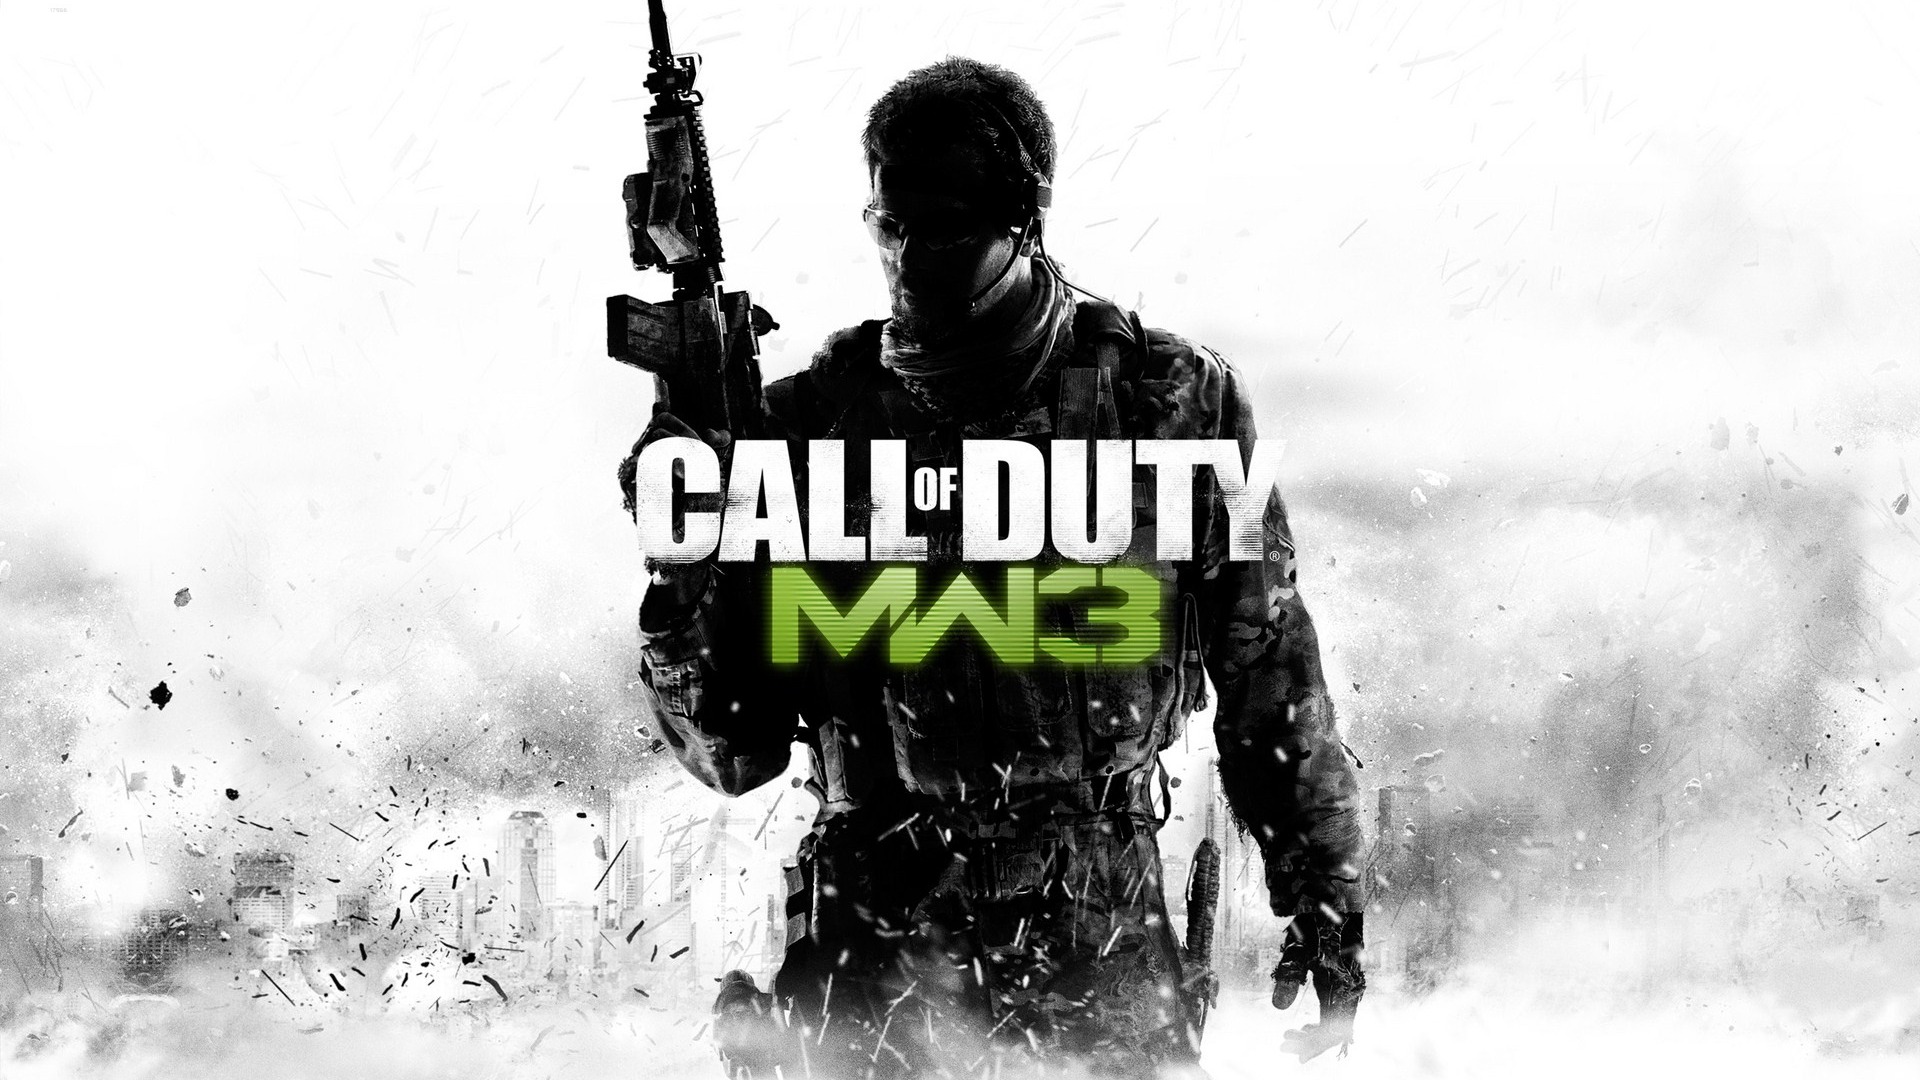 call of duty 3 mw download free